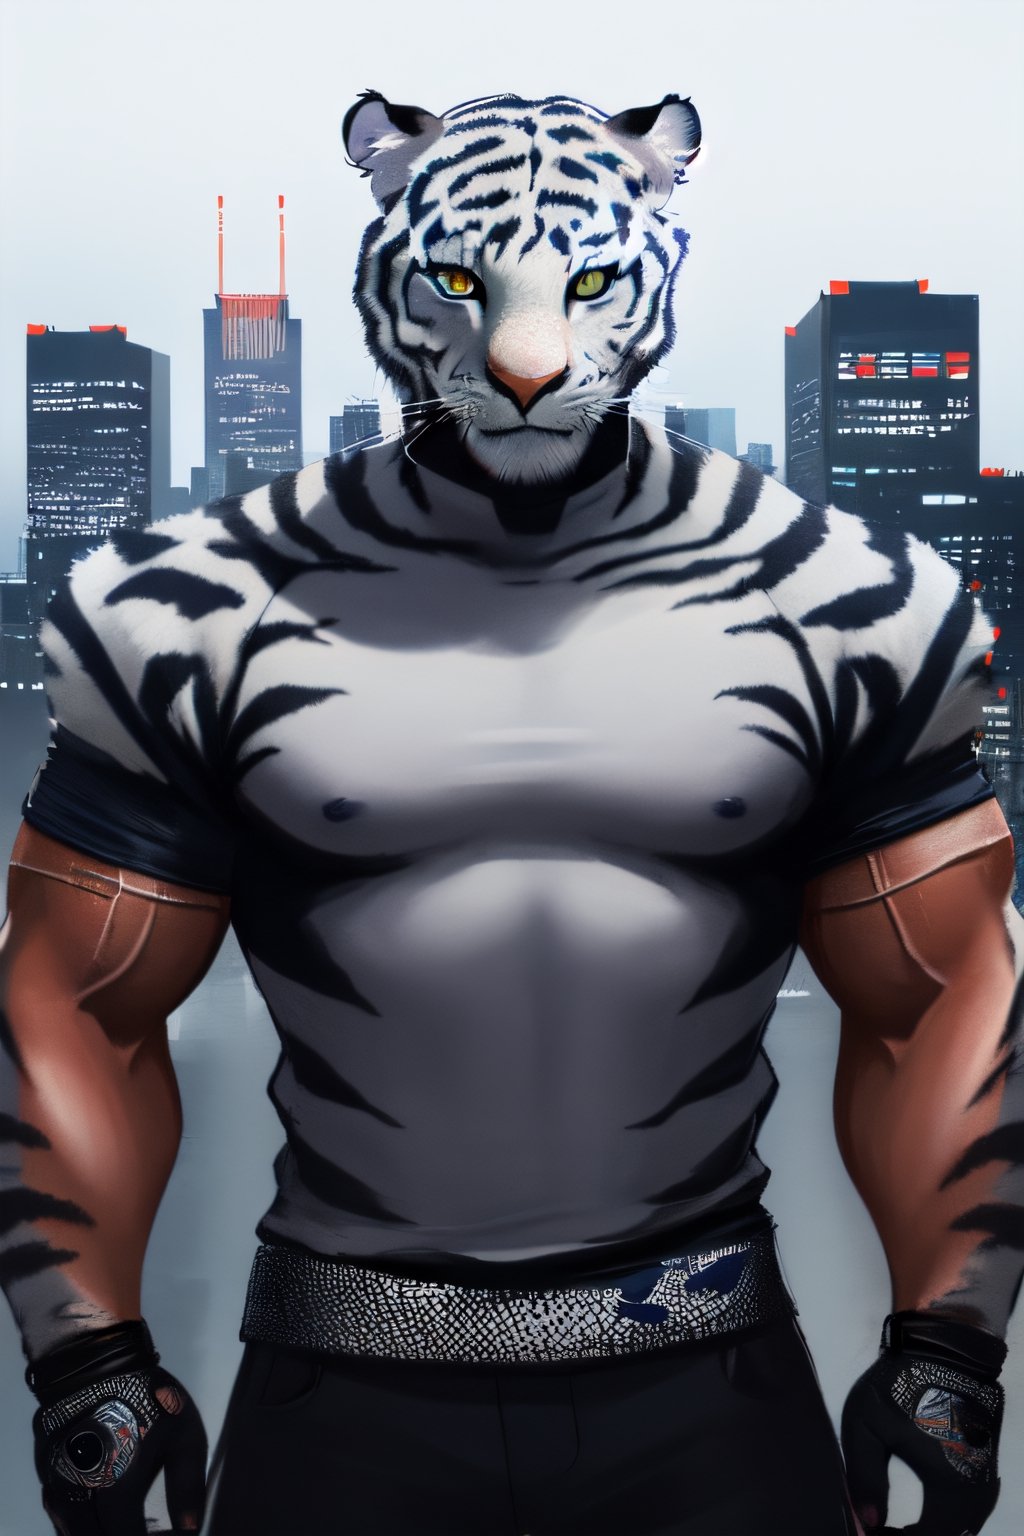 streetwear, white tiger, mutant, muscle body, samurai style, cyberpunk background, bright background,(MexicoCity behind)Dallas cowboys